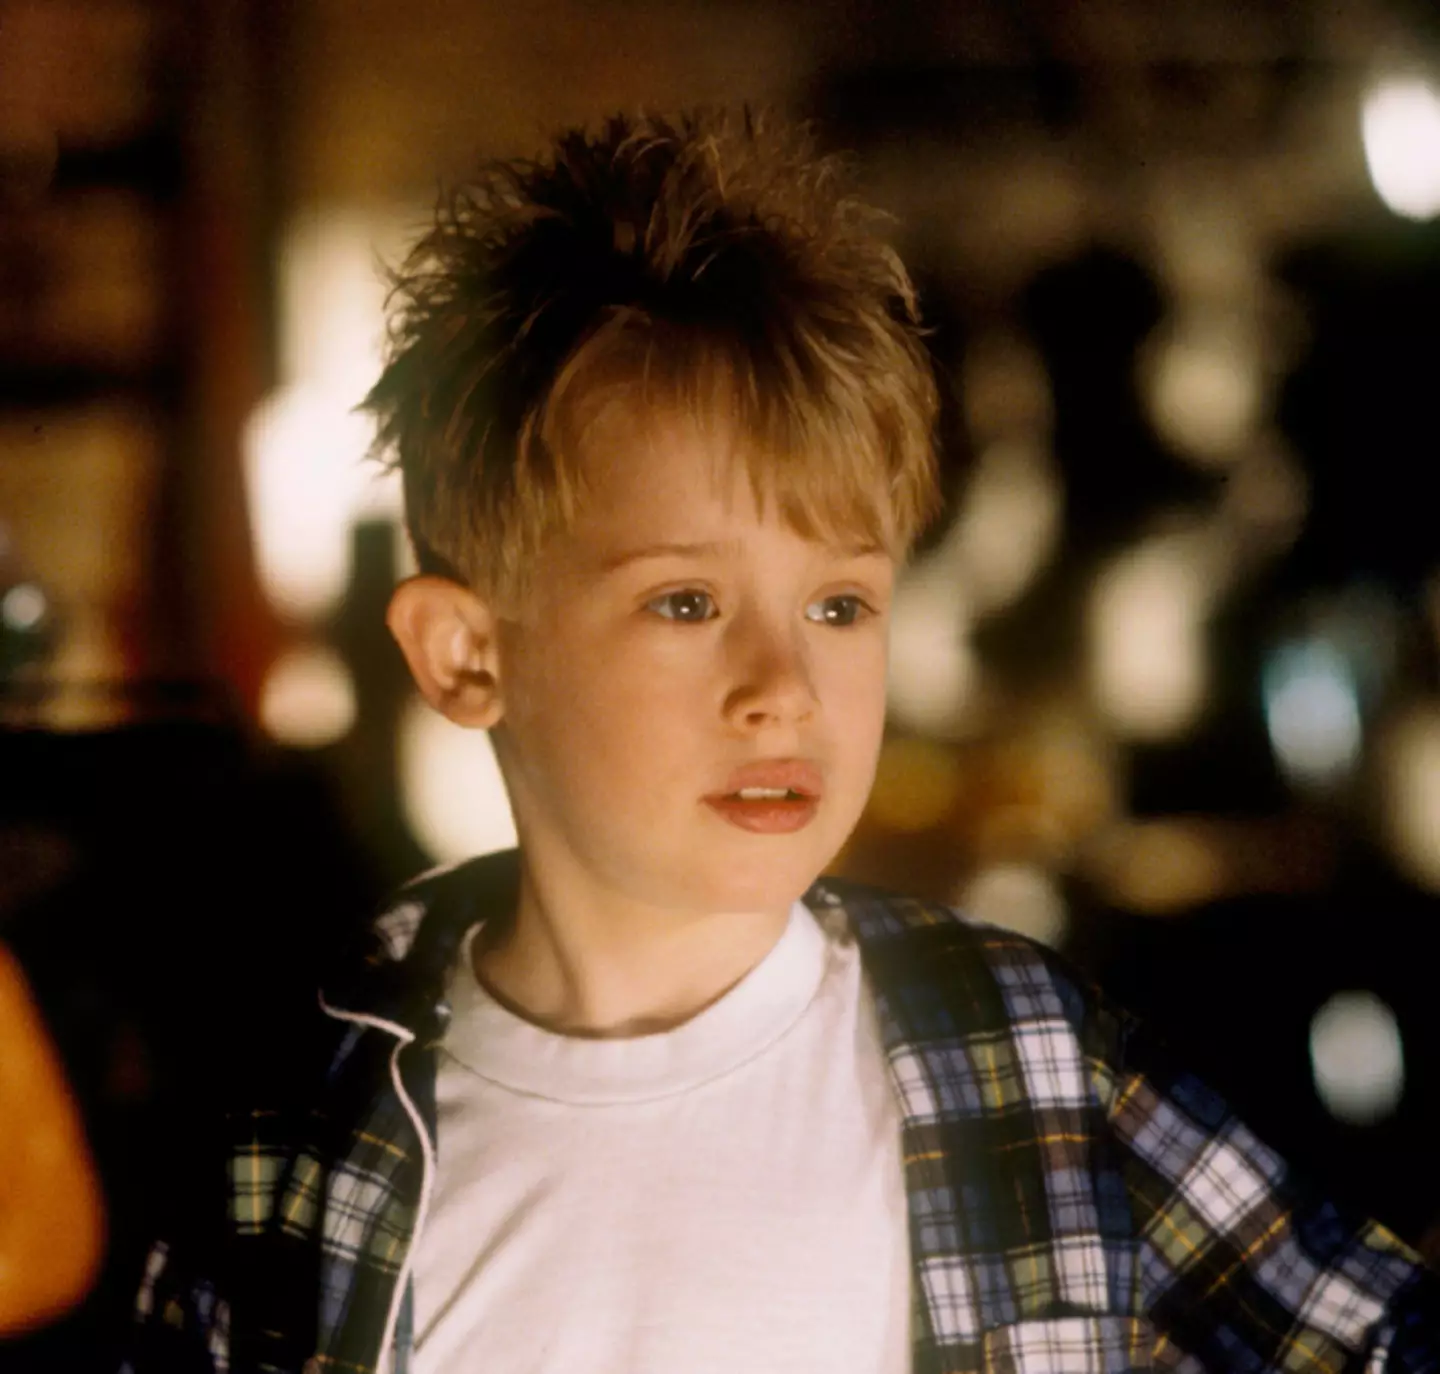 Culkin was just 10 years old when Home Alone was released.